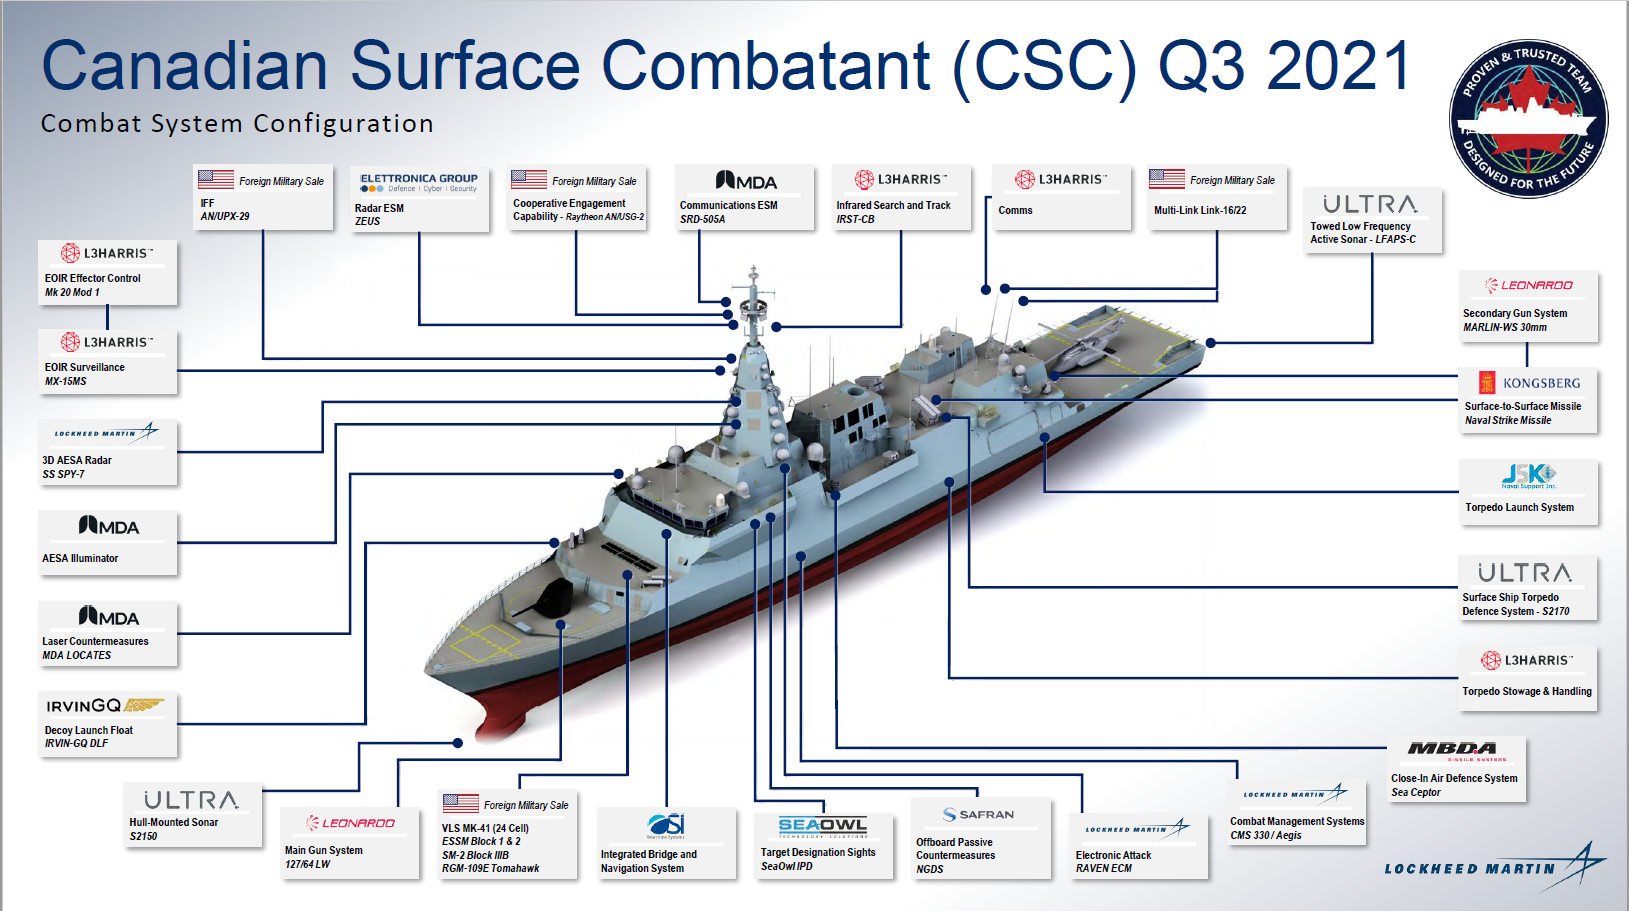 Canada Surface Combatant Csc Program Page 4 Defencehub Global